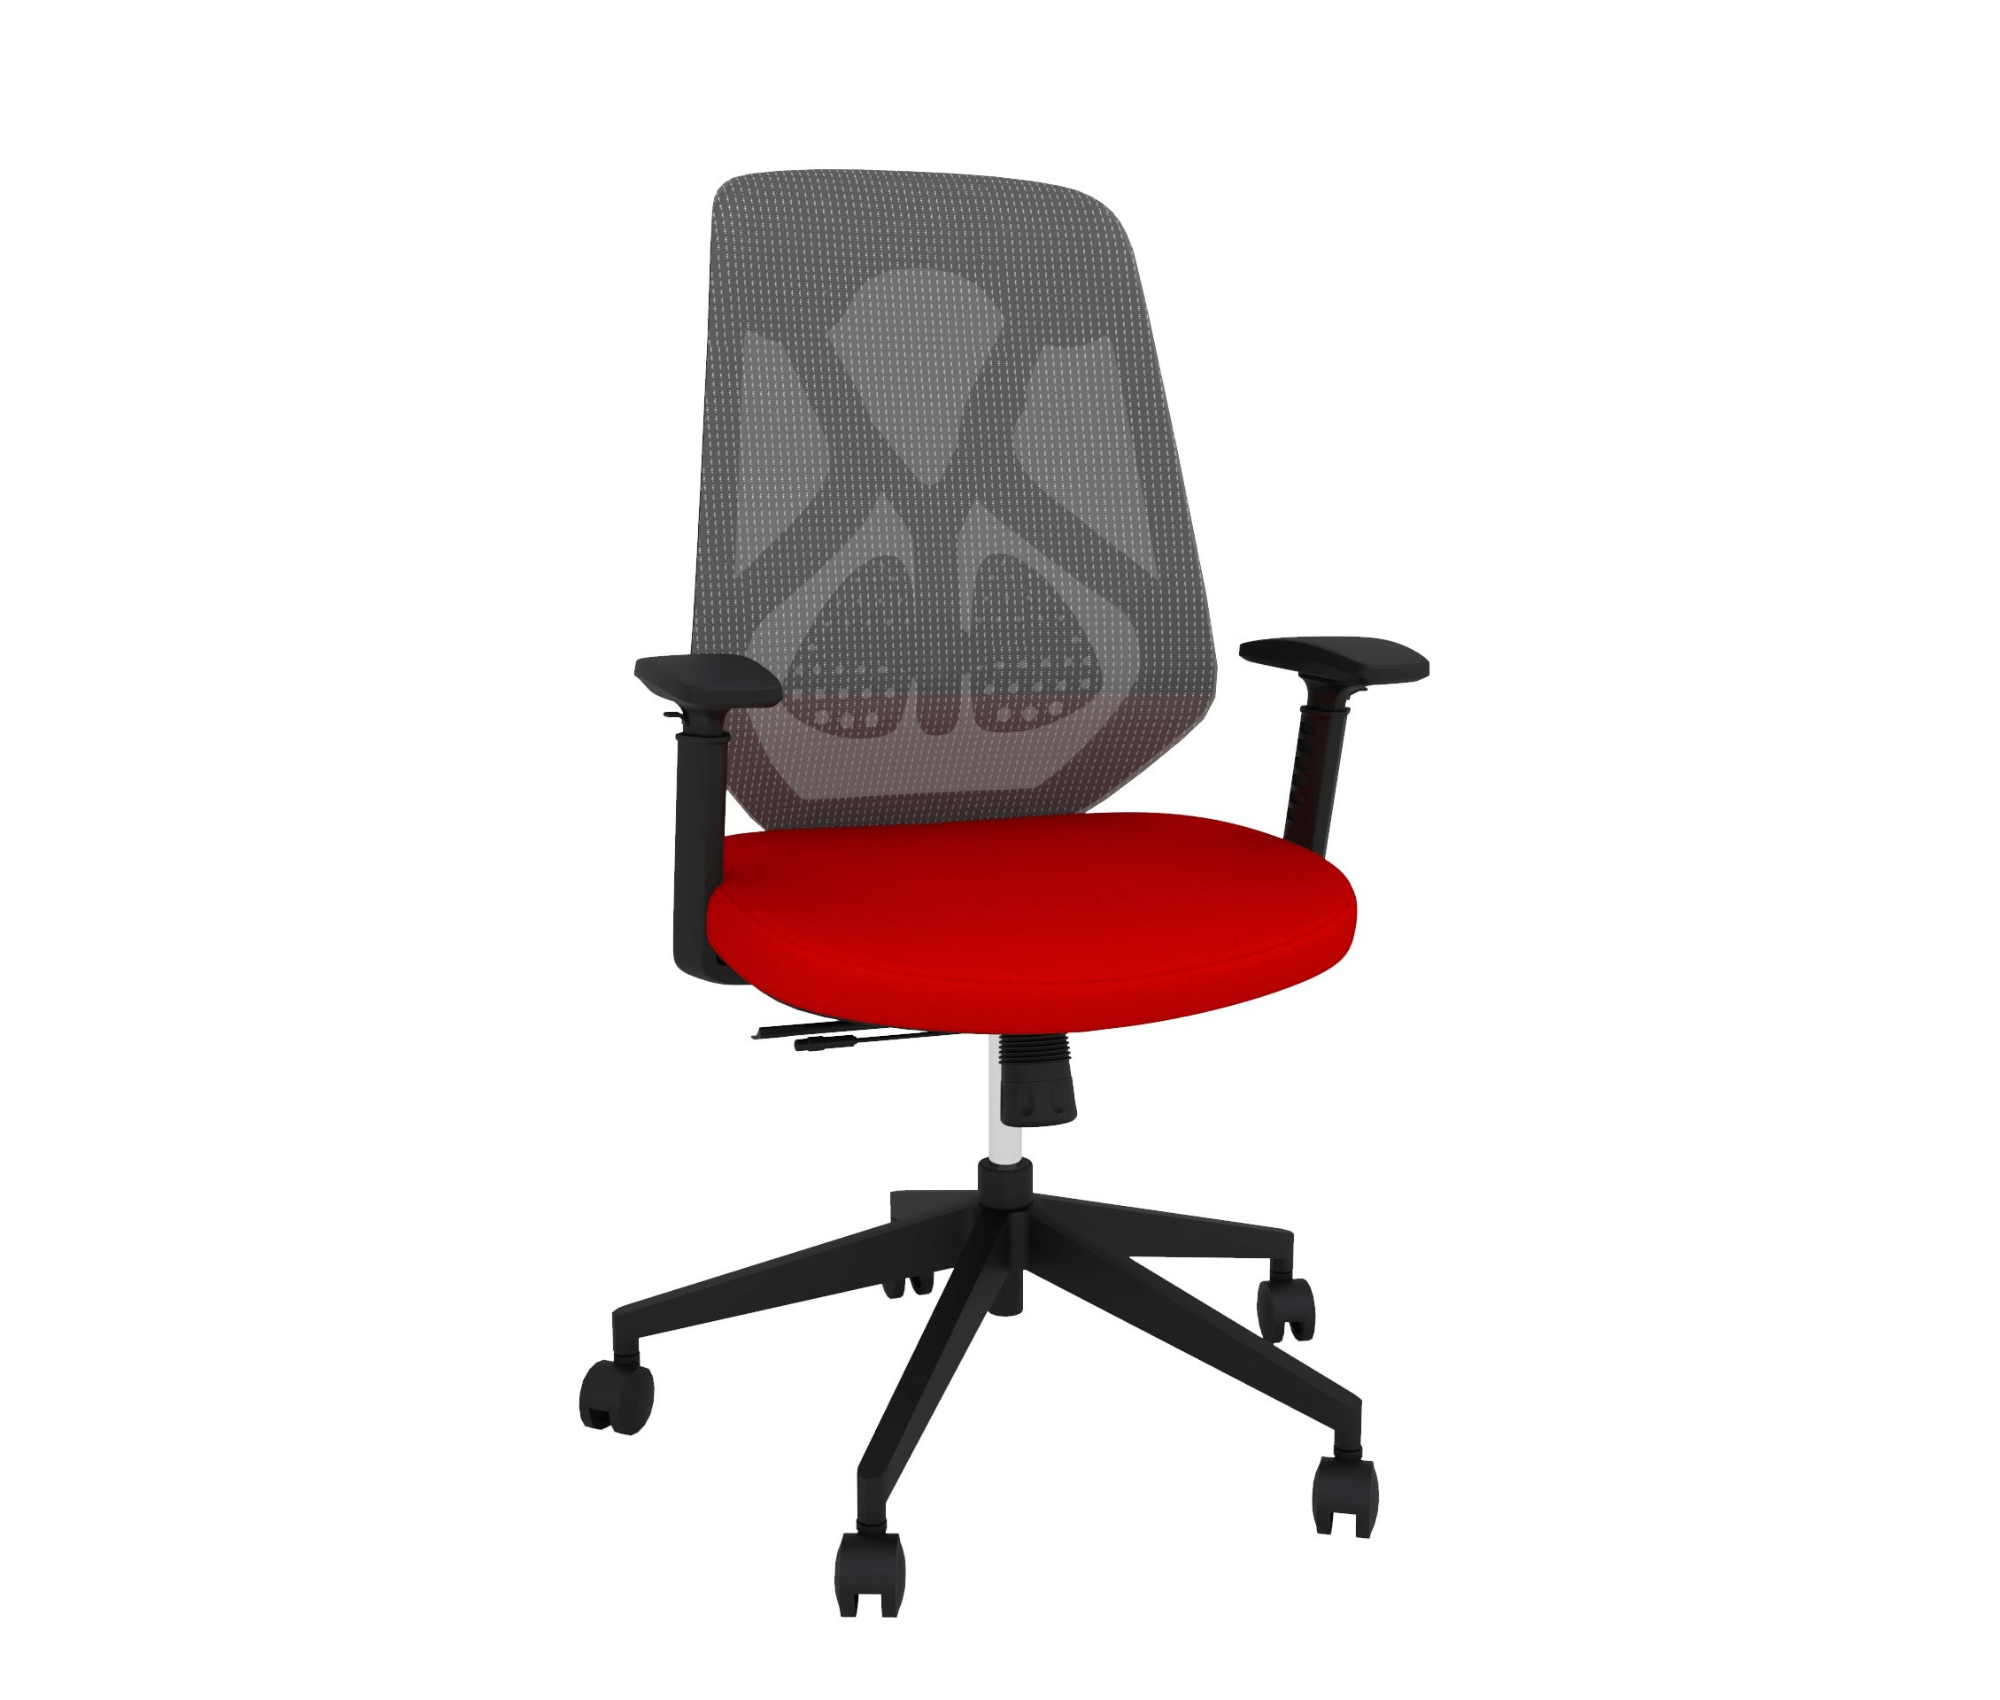 Ergonomic Chair | Office Chair with Adjustable Arms Porvata Office Chairs Red